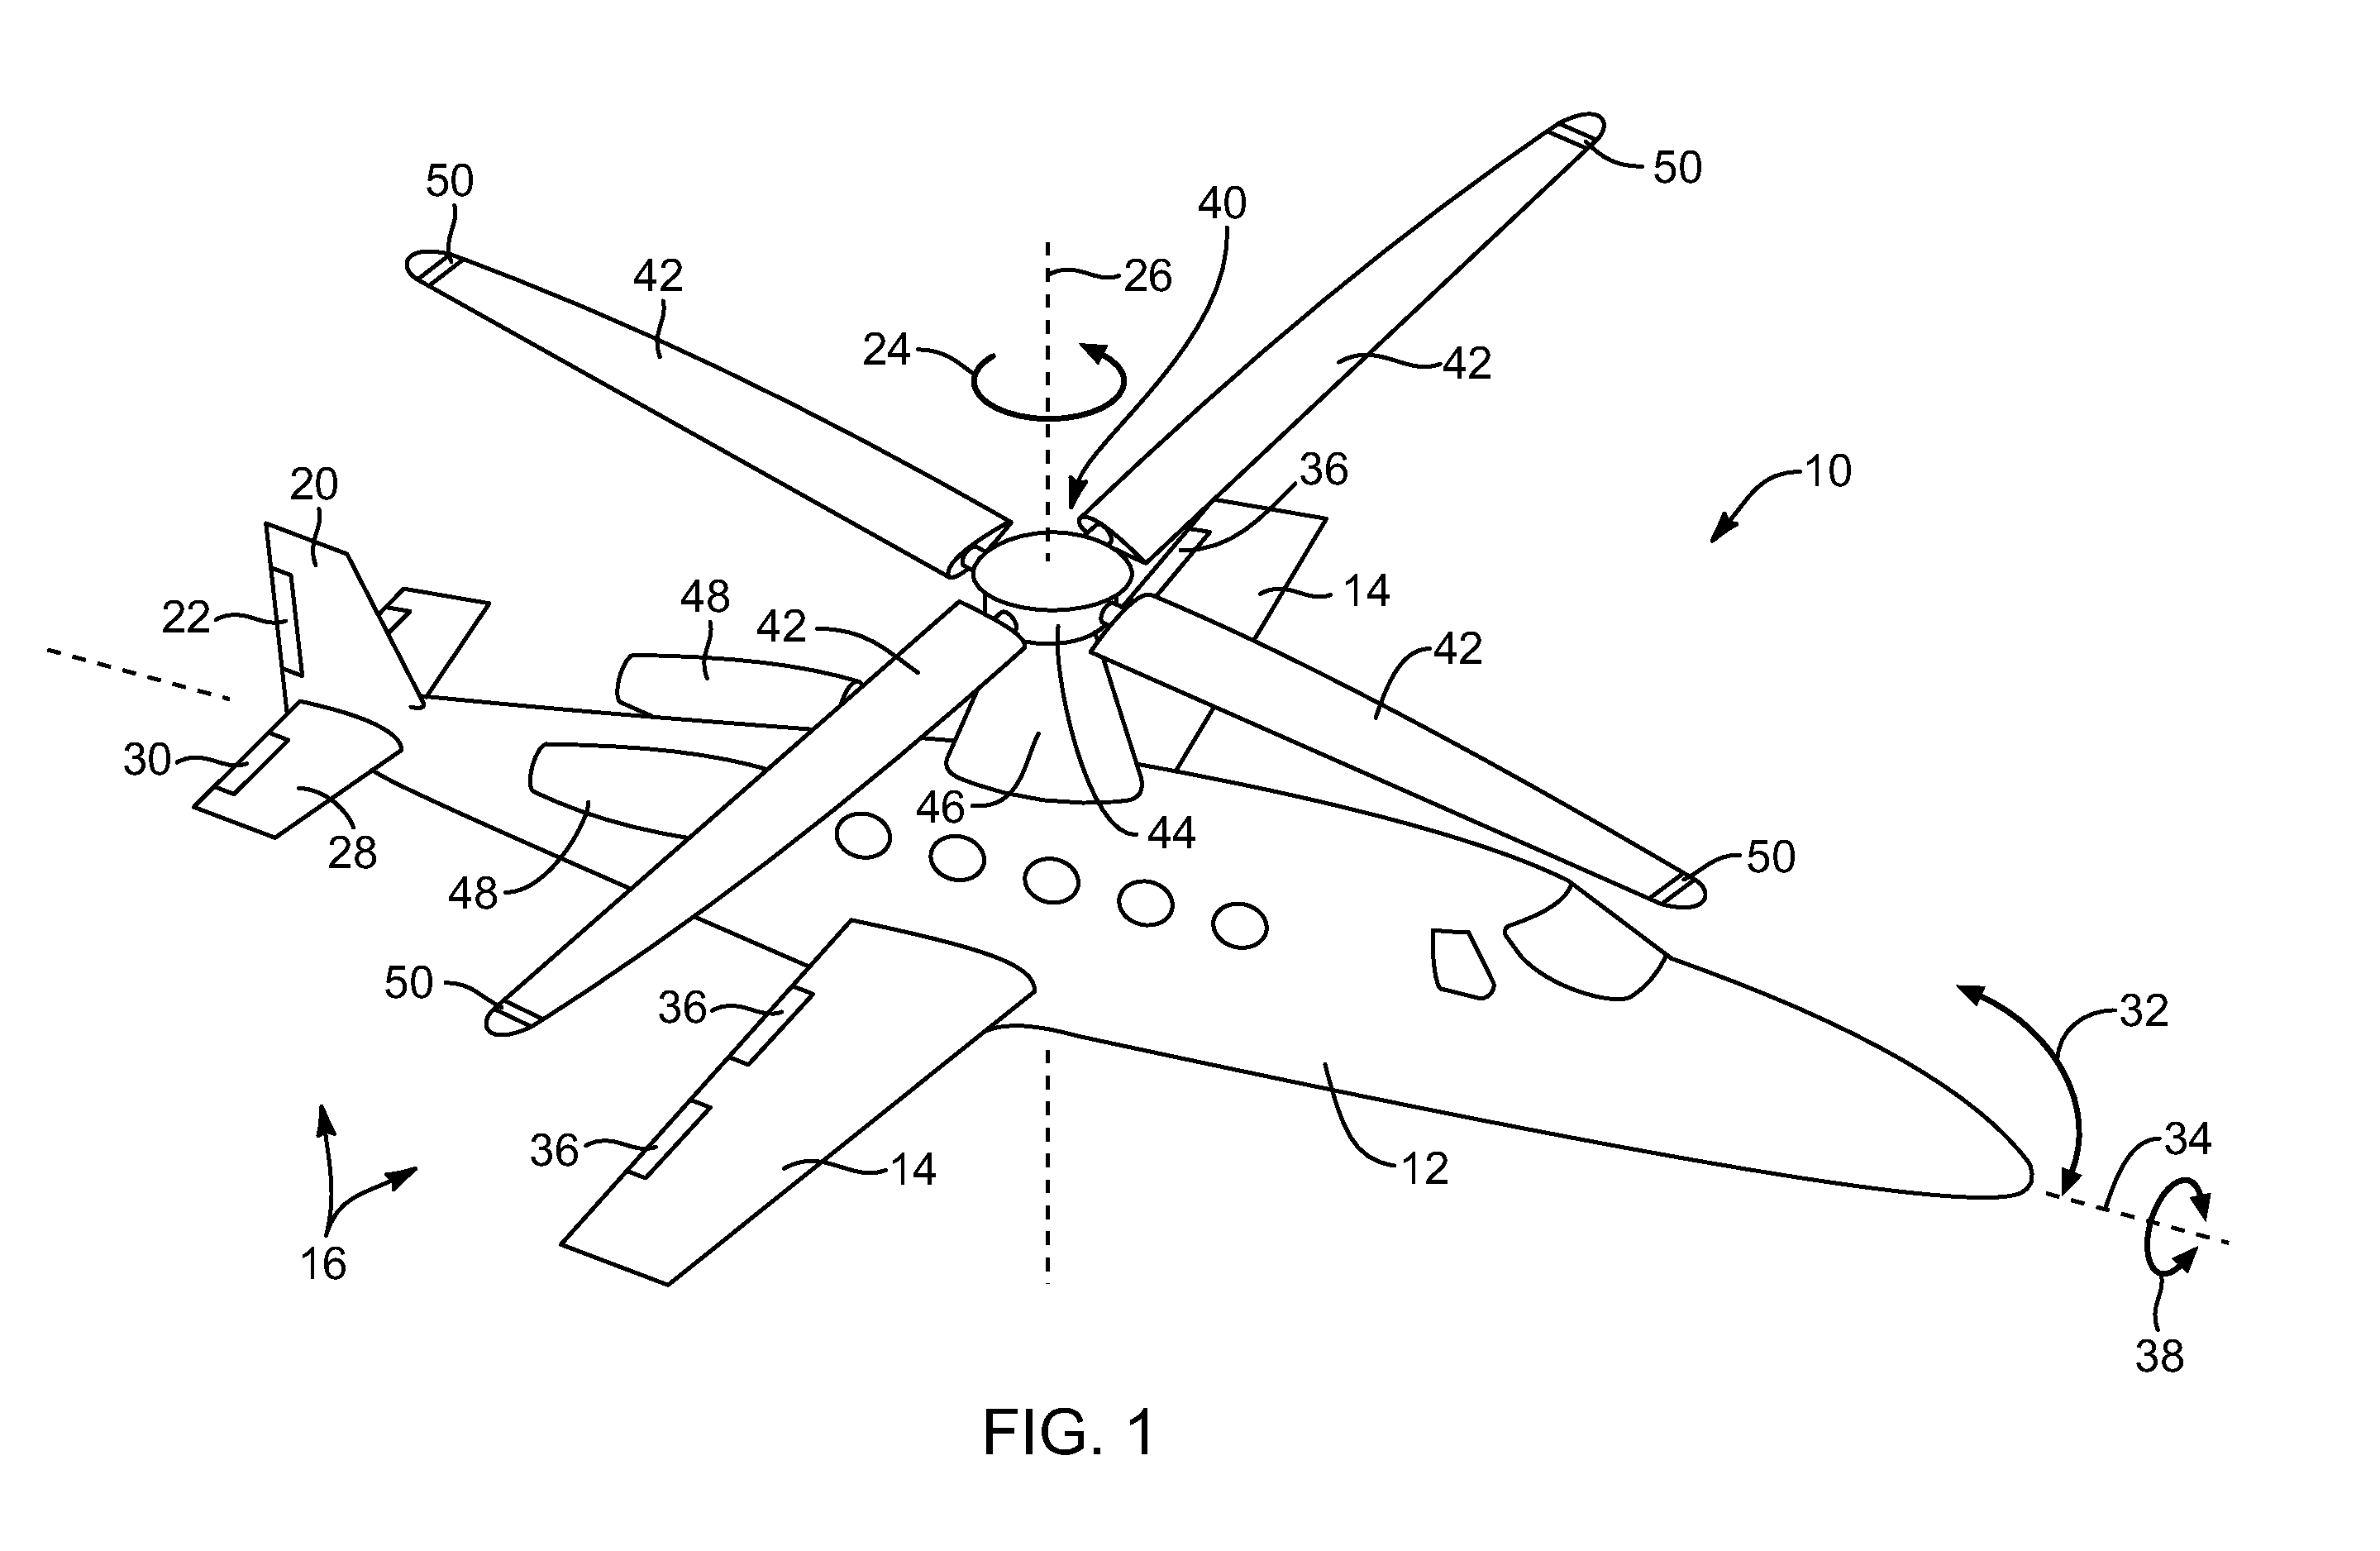 Gyroplane prerotation by compressed air